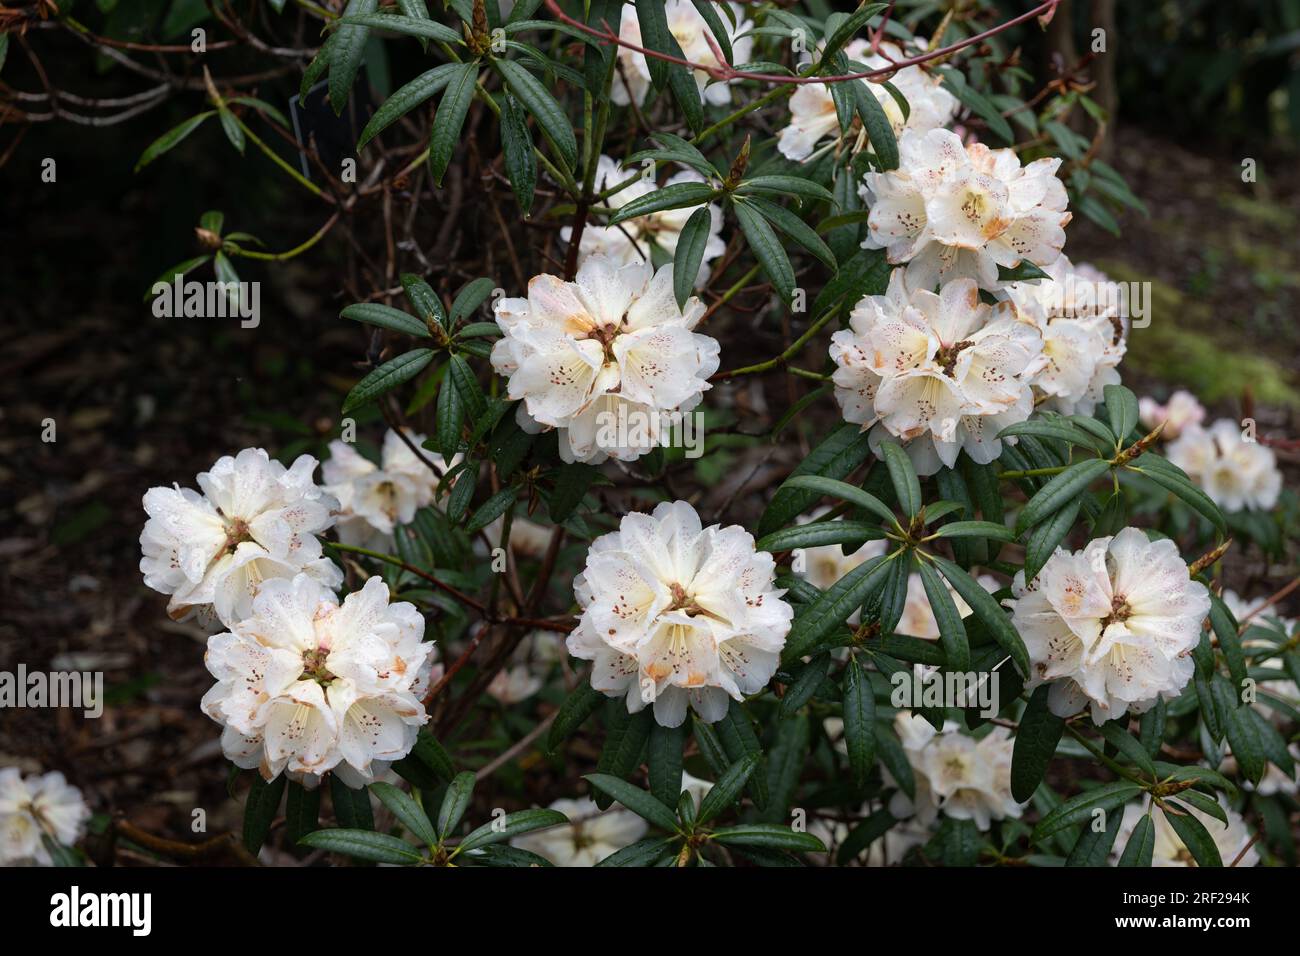 Rhododendron irroratum blooming flower in spring, flowering plant in the family Ericaceae, native region: China and Vietnam. Stock Photo